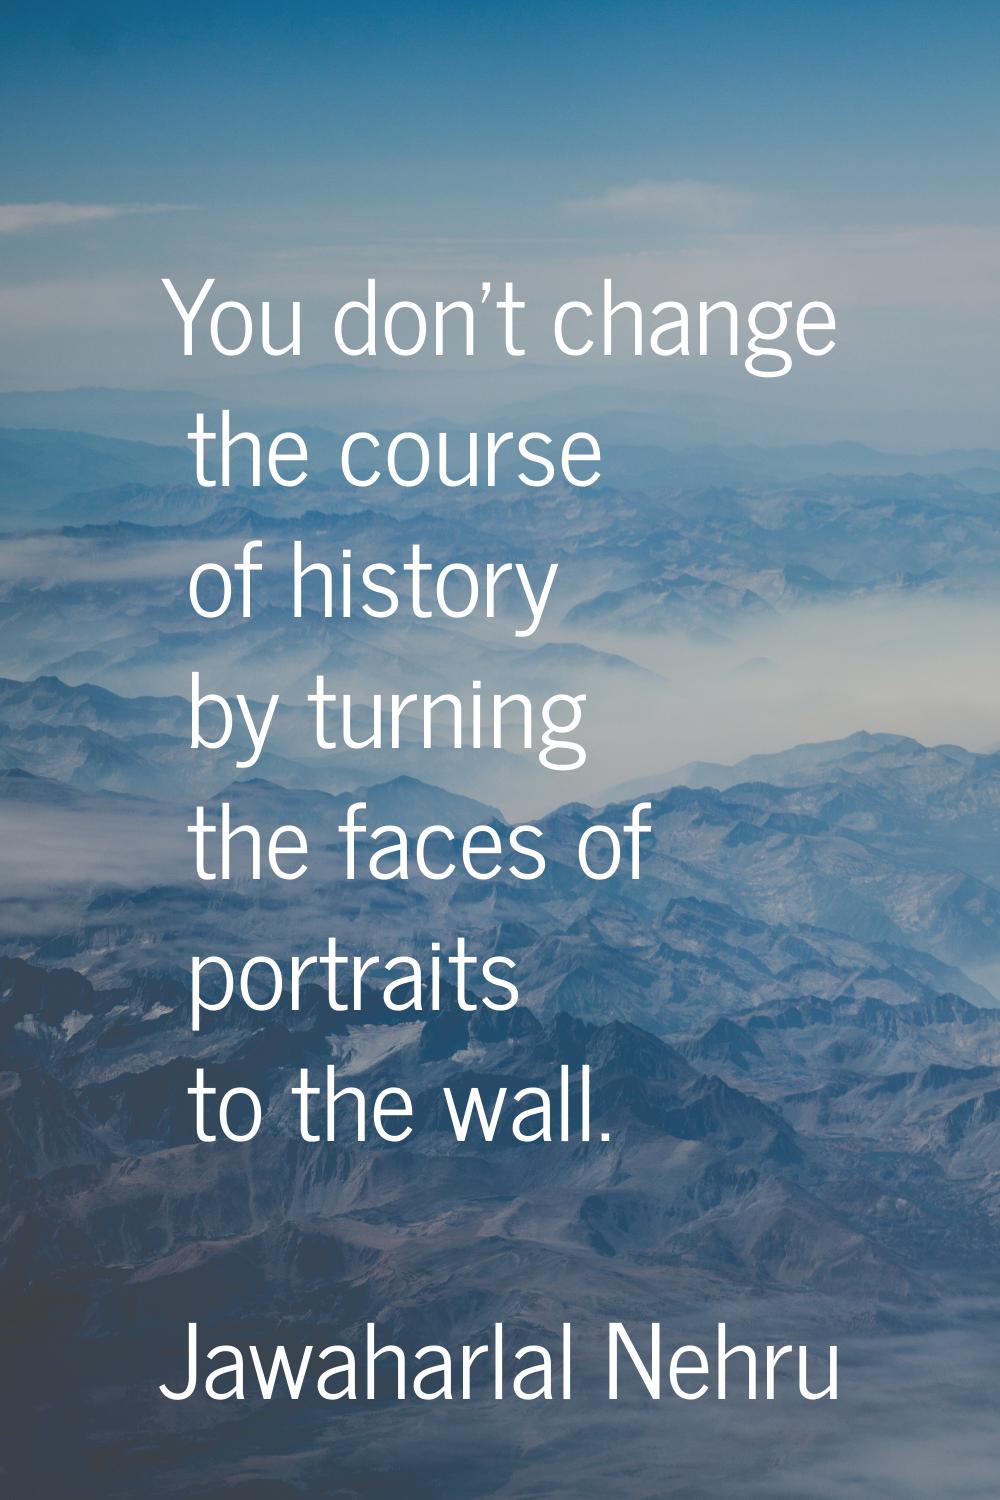 You don't change the course of history by turning the faces of portraits to the wall.